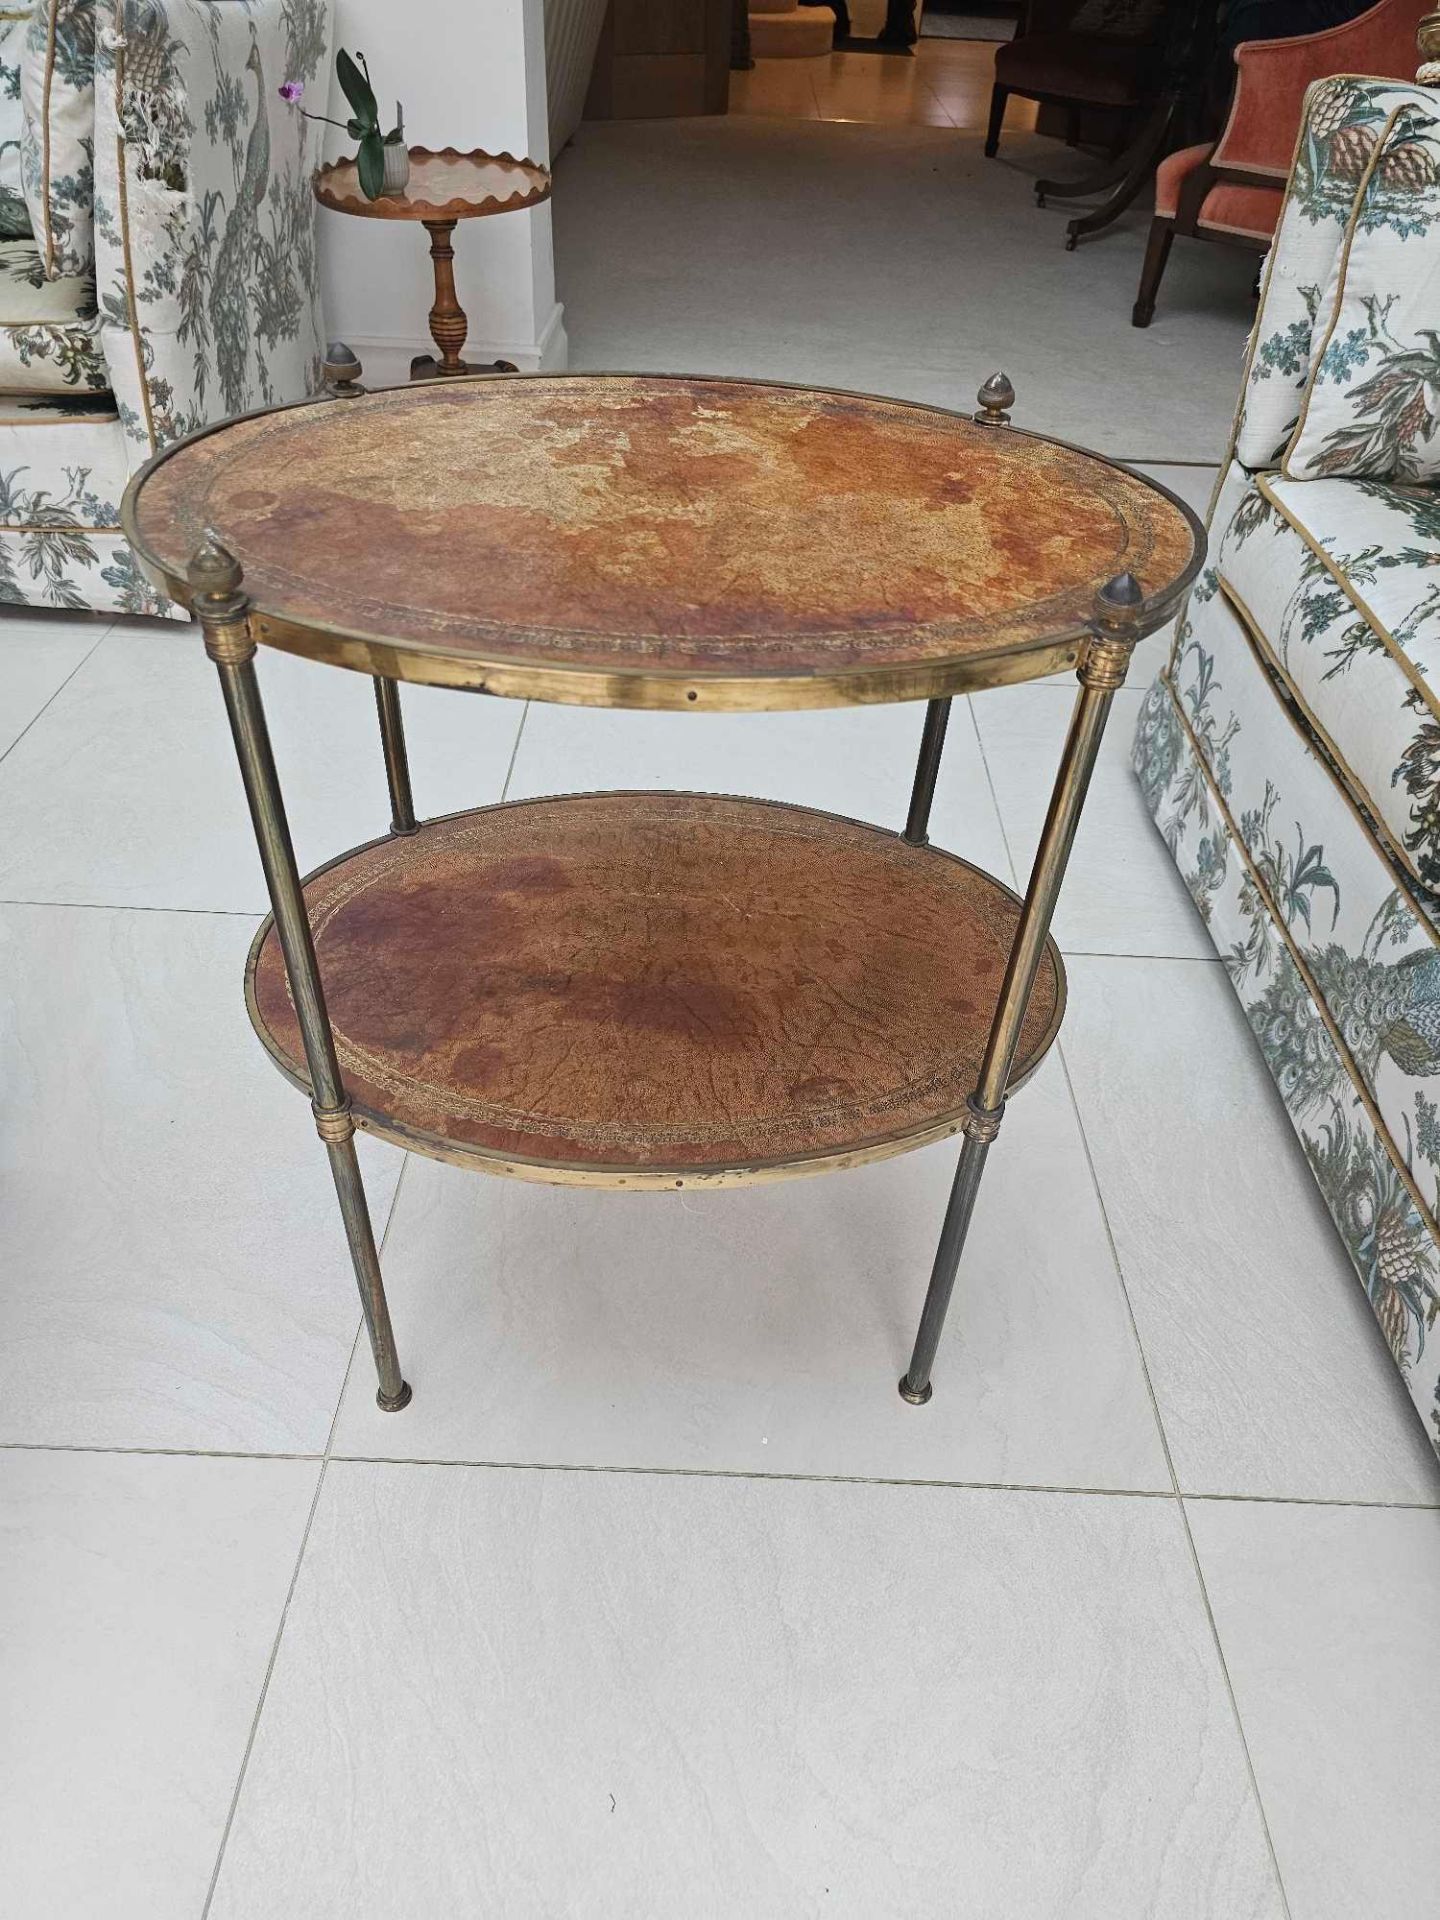 Oval Regency Style Brass Oval Etagere Two Well Figured Leather Clad Tiers United By Elegant Turned